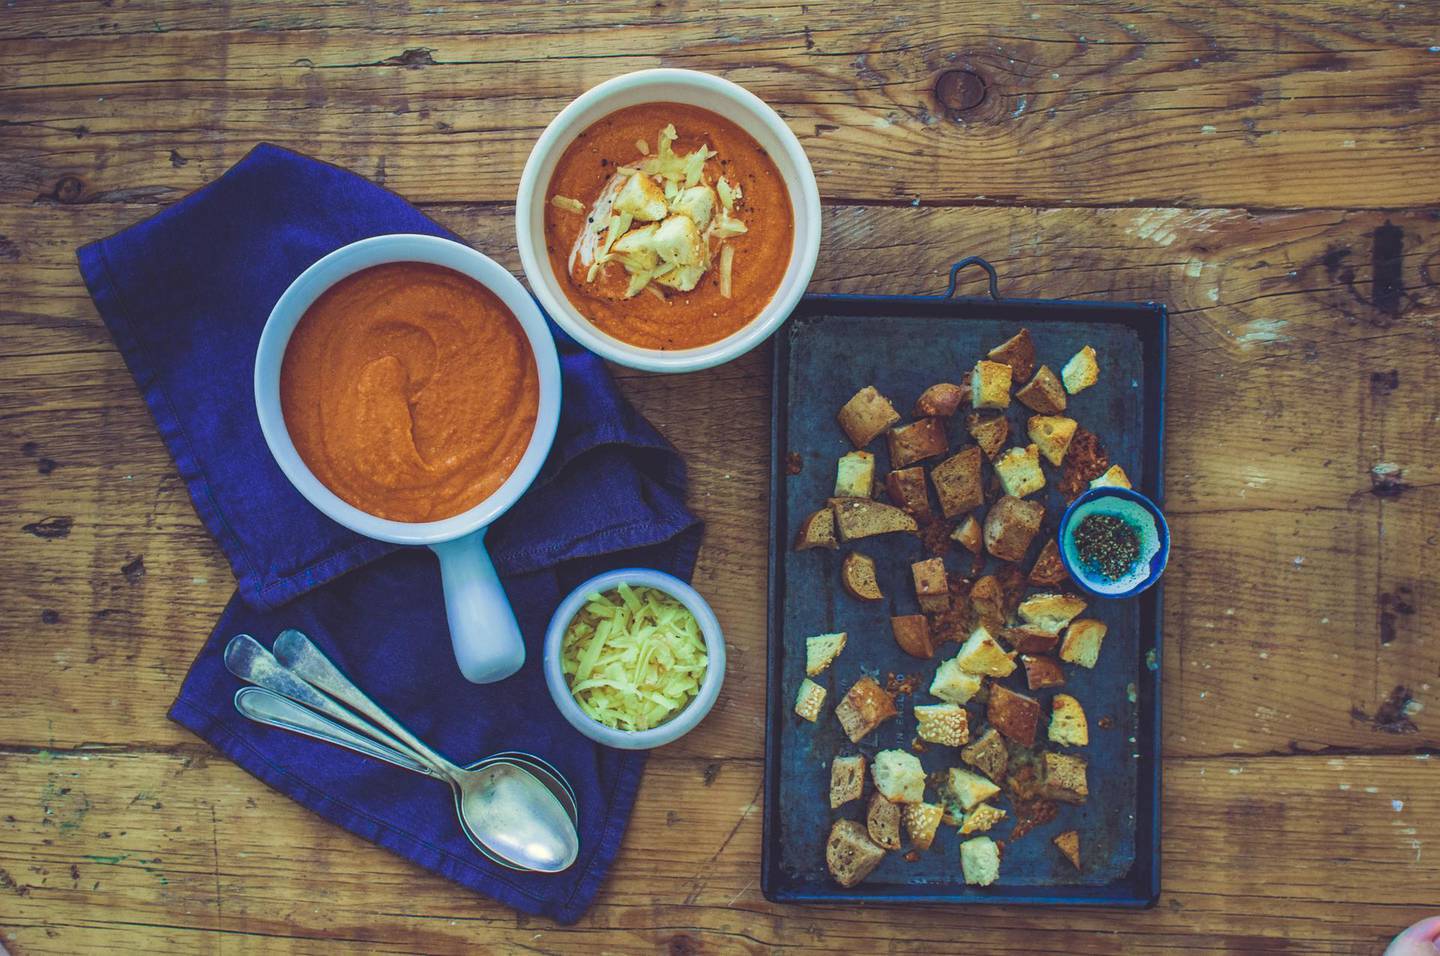 Roasted tomato soup with cheesy croutons. Courtesy Scott Price